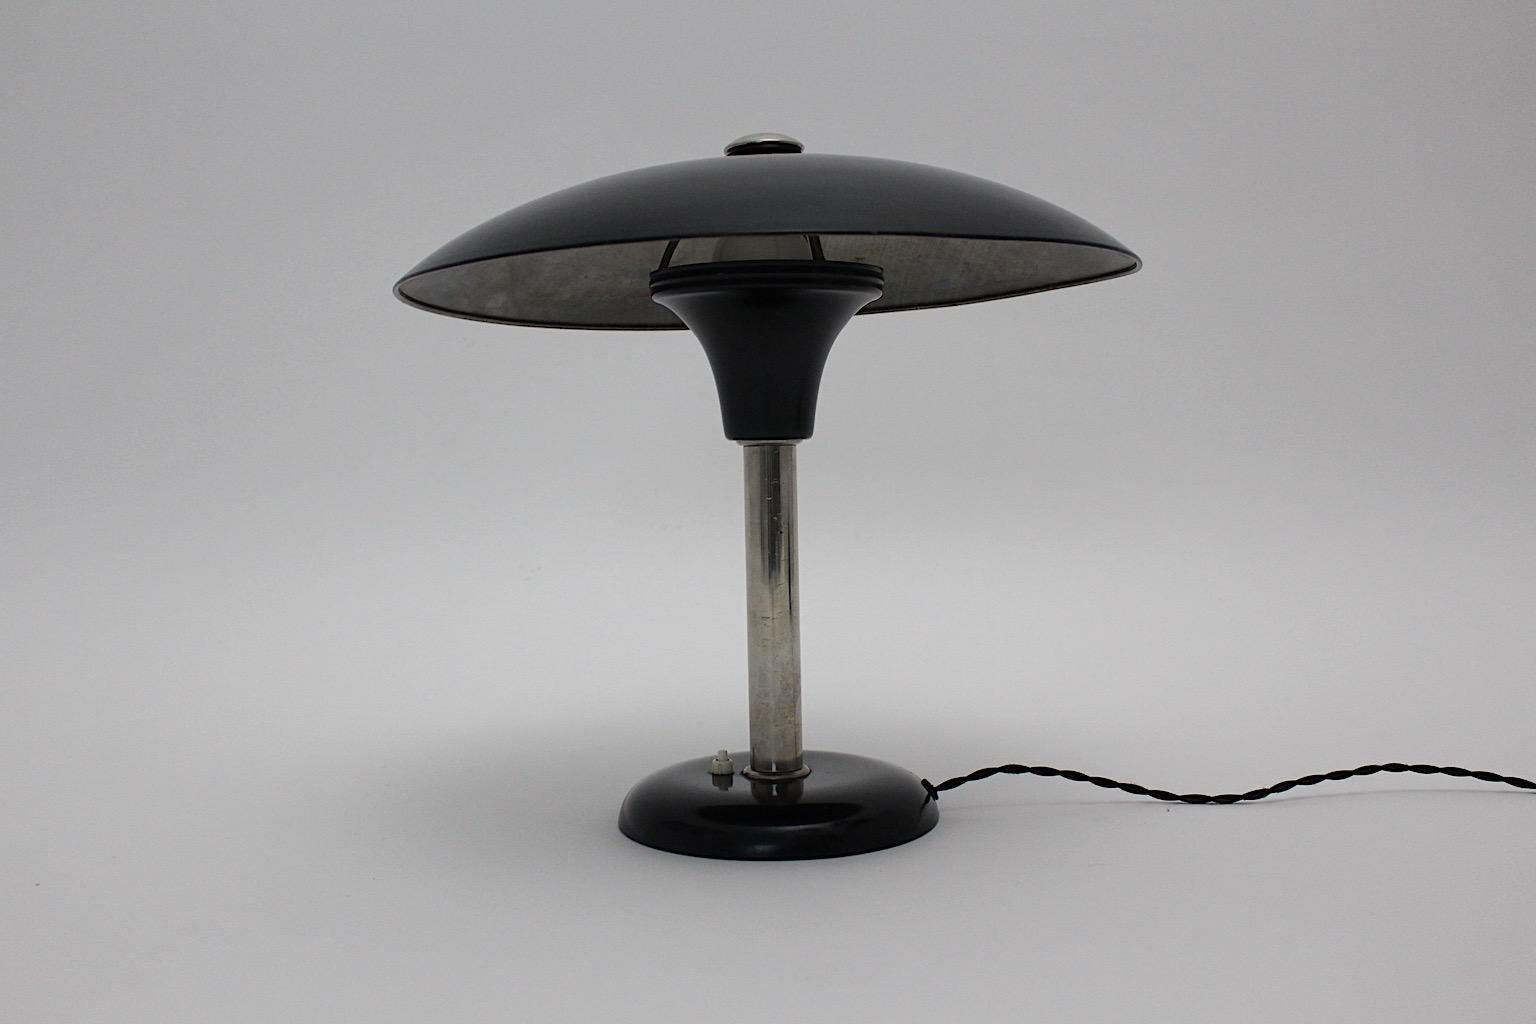 An Art Deco vintage black chrome table lamp or desk lamp designed by Max Schumacher 1934 Germany and executed by Werner Schröder, Lobenstein, Germany.
The black lacquered metal table lamp shows a beautiful shade like a mushroom with a chromed stem